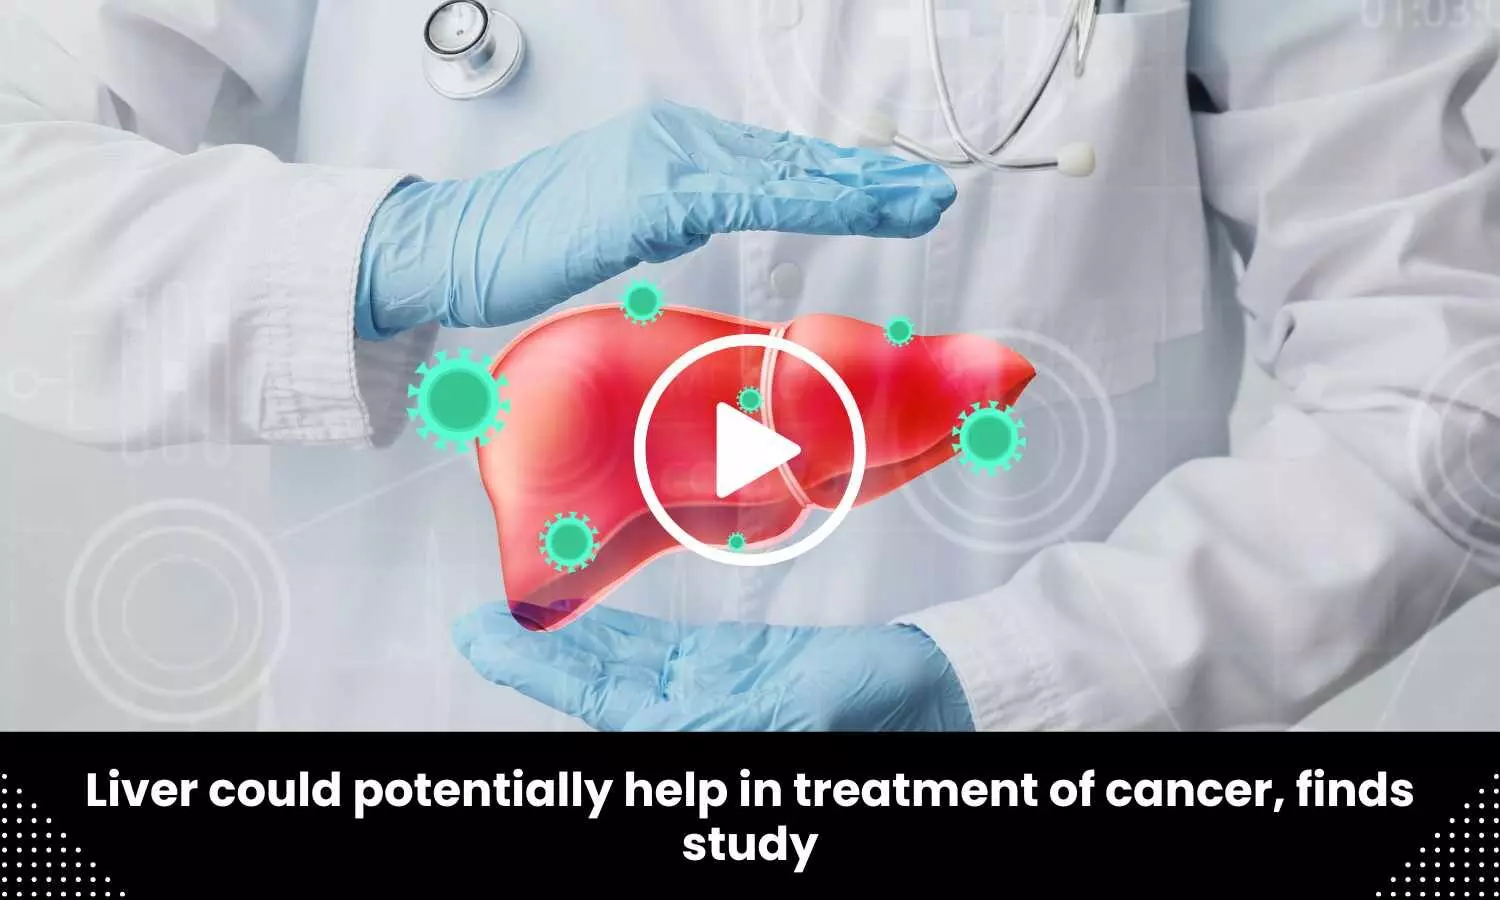 Liver could potentially help in treatment of cancer, finds study